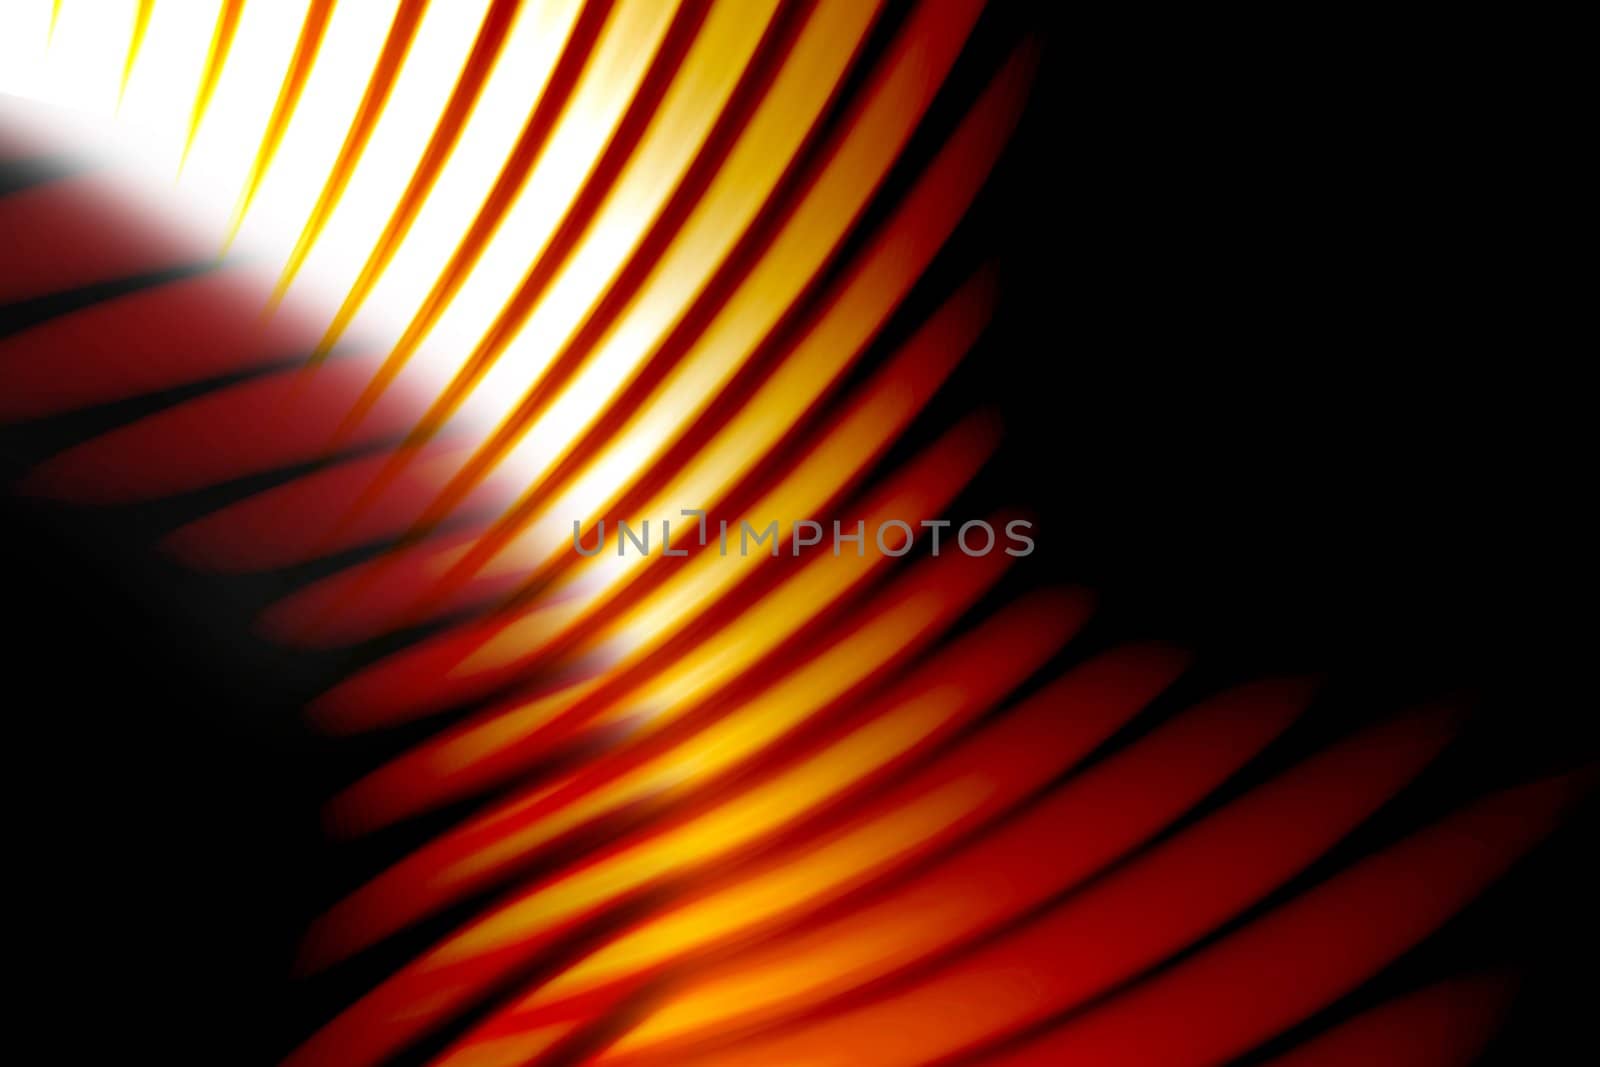 An abstract and colored background